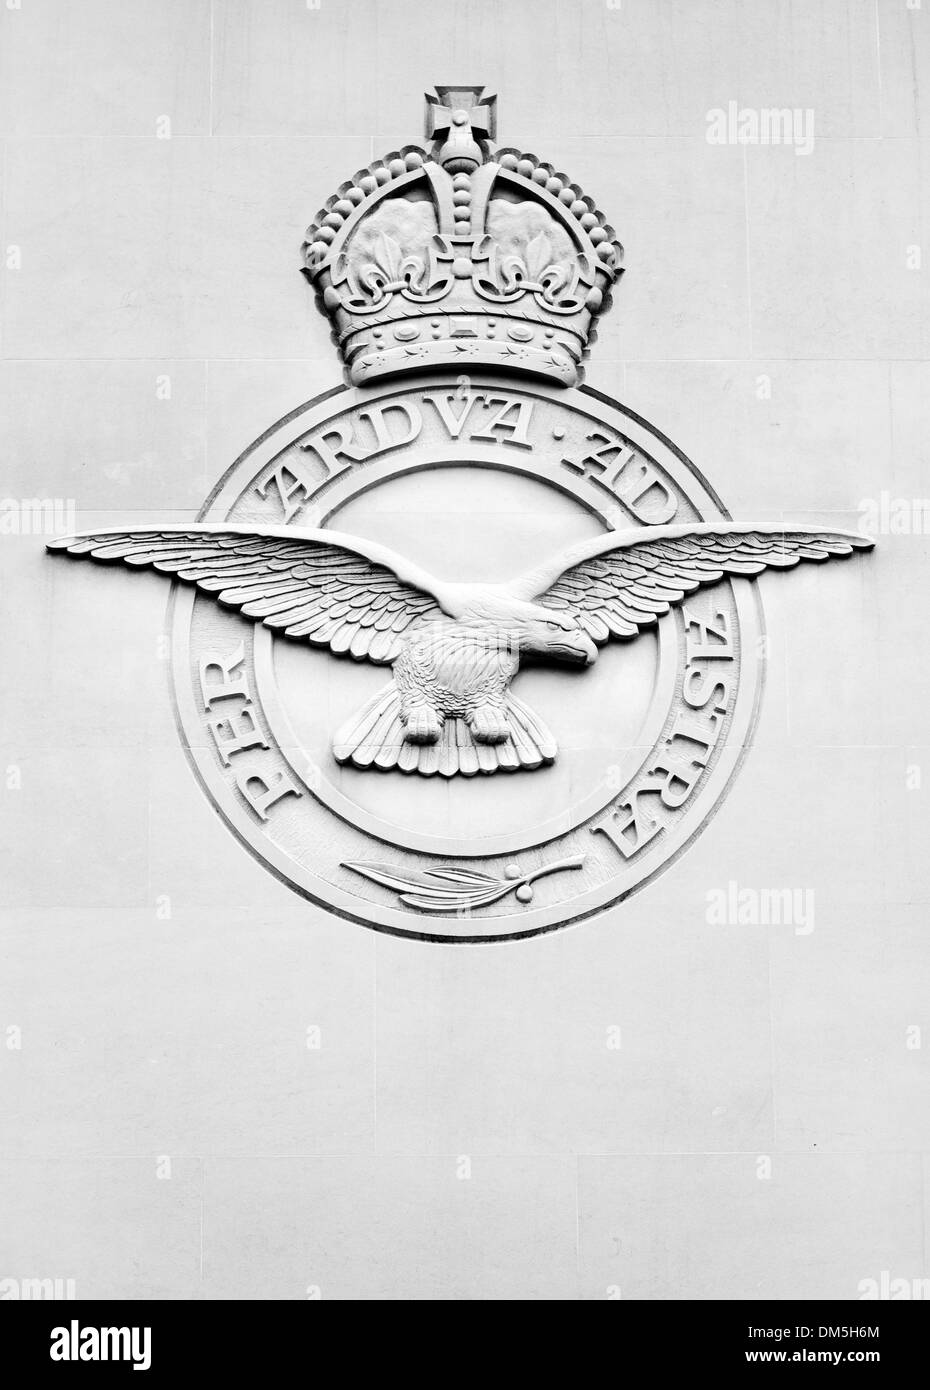 British Royal Air Force emblem of an eagle and crown Stock Photo - Alamy